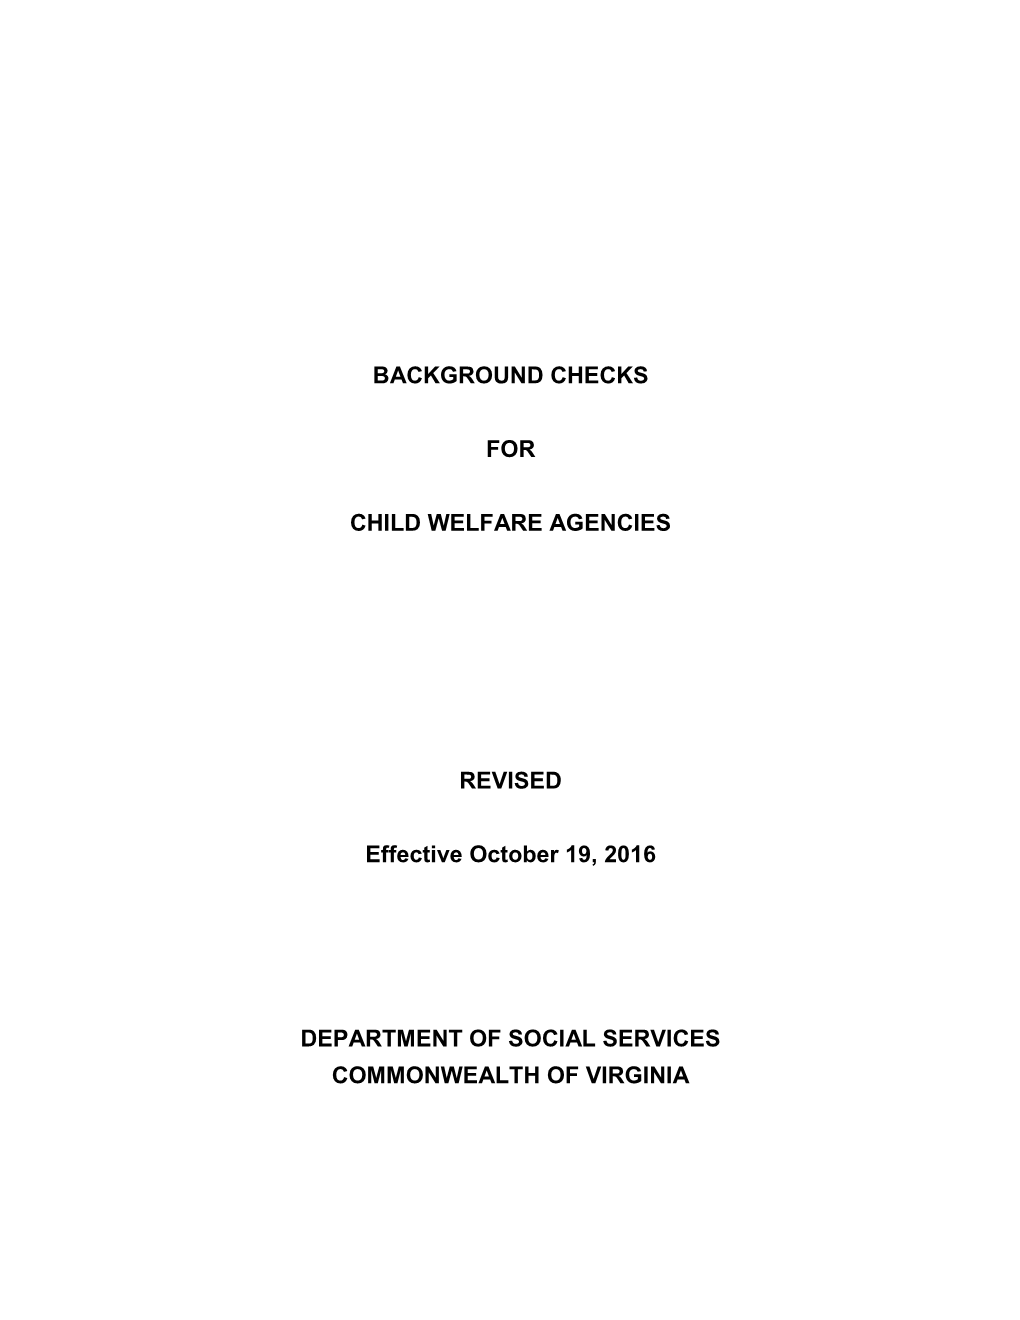 BACKGROUND CHECKS for CHILD WELFARE AGENCIES REVISED Effective October 19, 2016 DEPARTMENT of SOCIAL SERVICES COMMONWEALTH of V